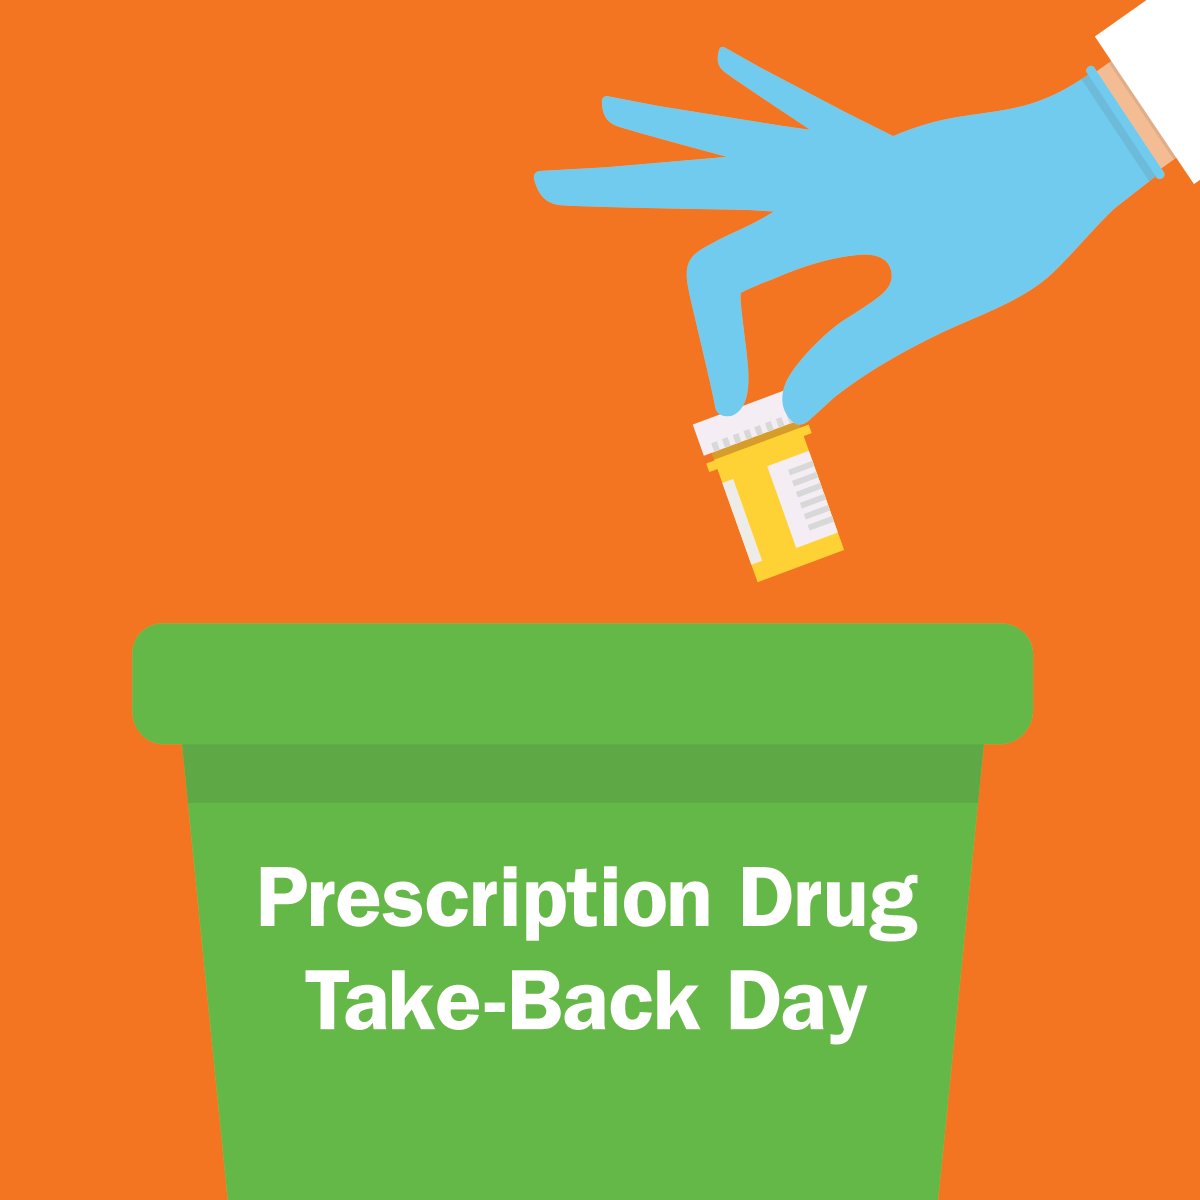 Get rid of your old meds and sharps safely and easily at Saturday's drive-through/walk-up #DrugTakeBackDay event. No questions asked. 10 a.m.-2 p.m., 1240 Lee Street, #Charlottesville. Sharps must be in a sharps container. #Cville